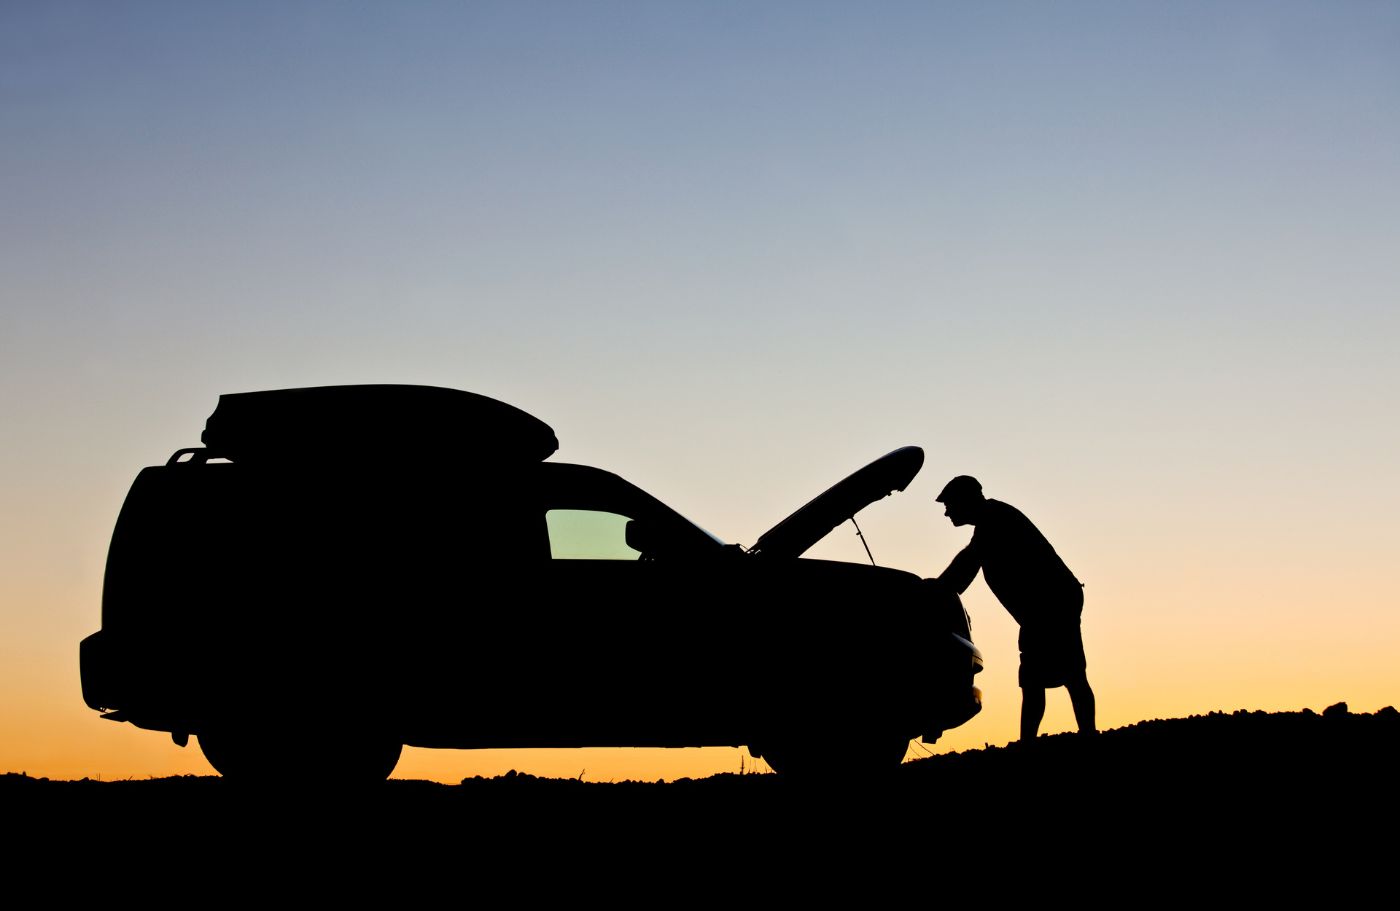 Book any of our roadside assistance on-demand services for the lowest price in our service area!